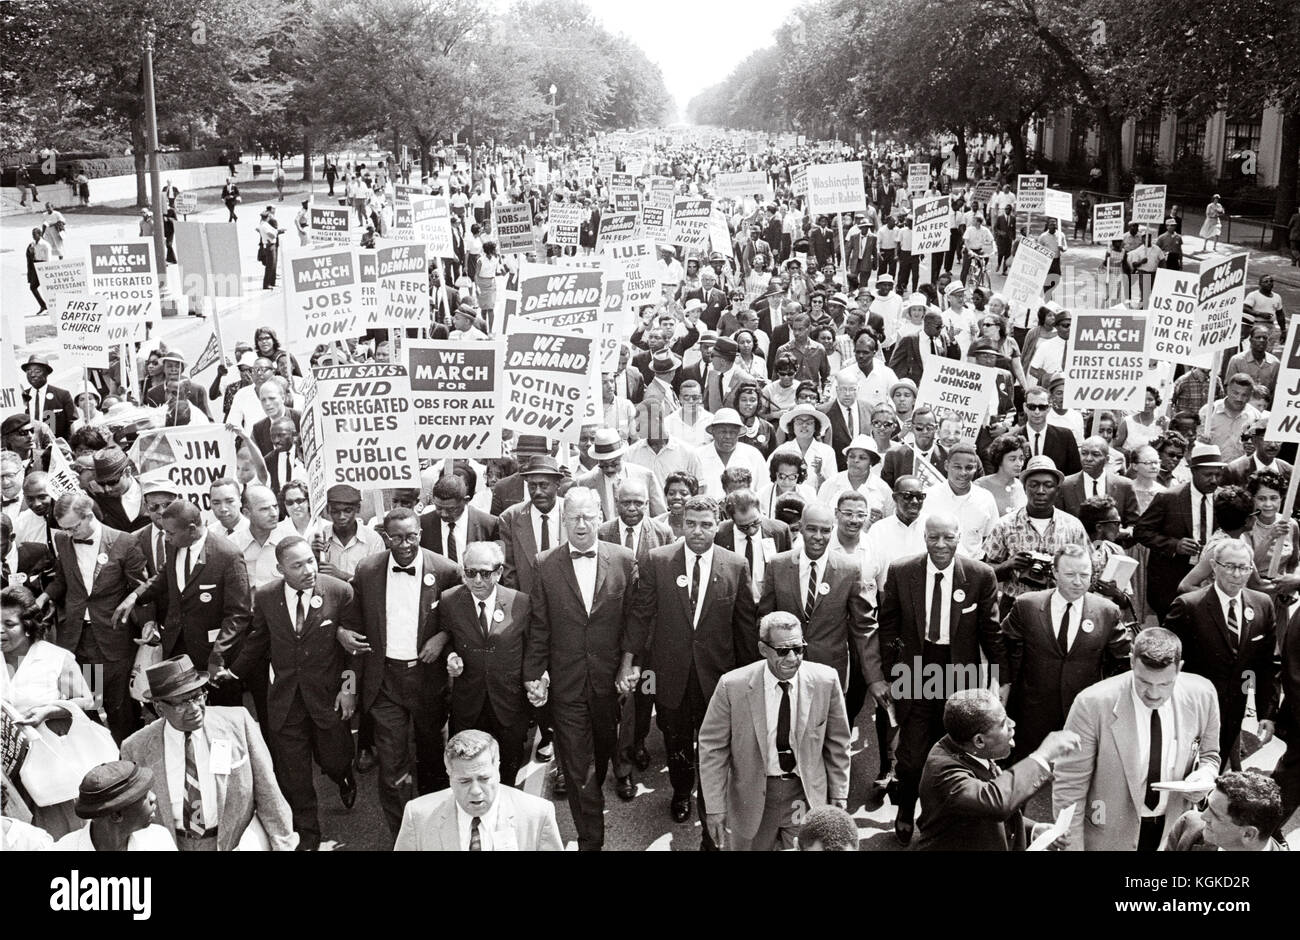 Leaders of the 1963 March on Washington for Jobs and Freedom hold hands as they lead a crowd of hundreds of thousands in Washington DC, August 28, 1963. Leaders in the front row include James Meredith, Dr. Martin Luther King, Jr., Rabbi Joachim Prinz,  Whitney Young, Roy Wilkins (light-colored suit);  A. Phillip Randolph; and Walter Reuther.  Credit: Arnie Sachs / CNP /MediaPunch Stock Photo